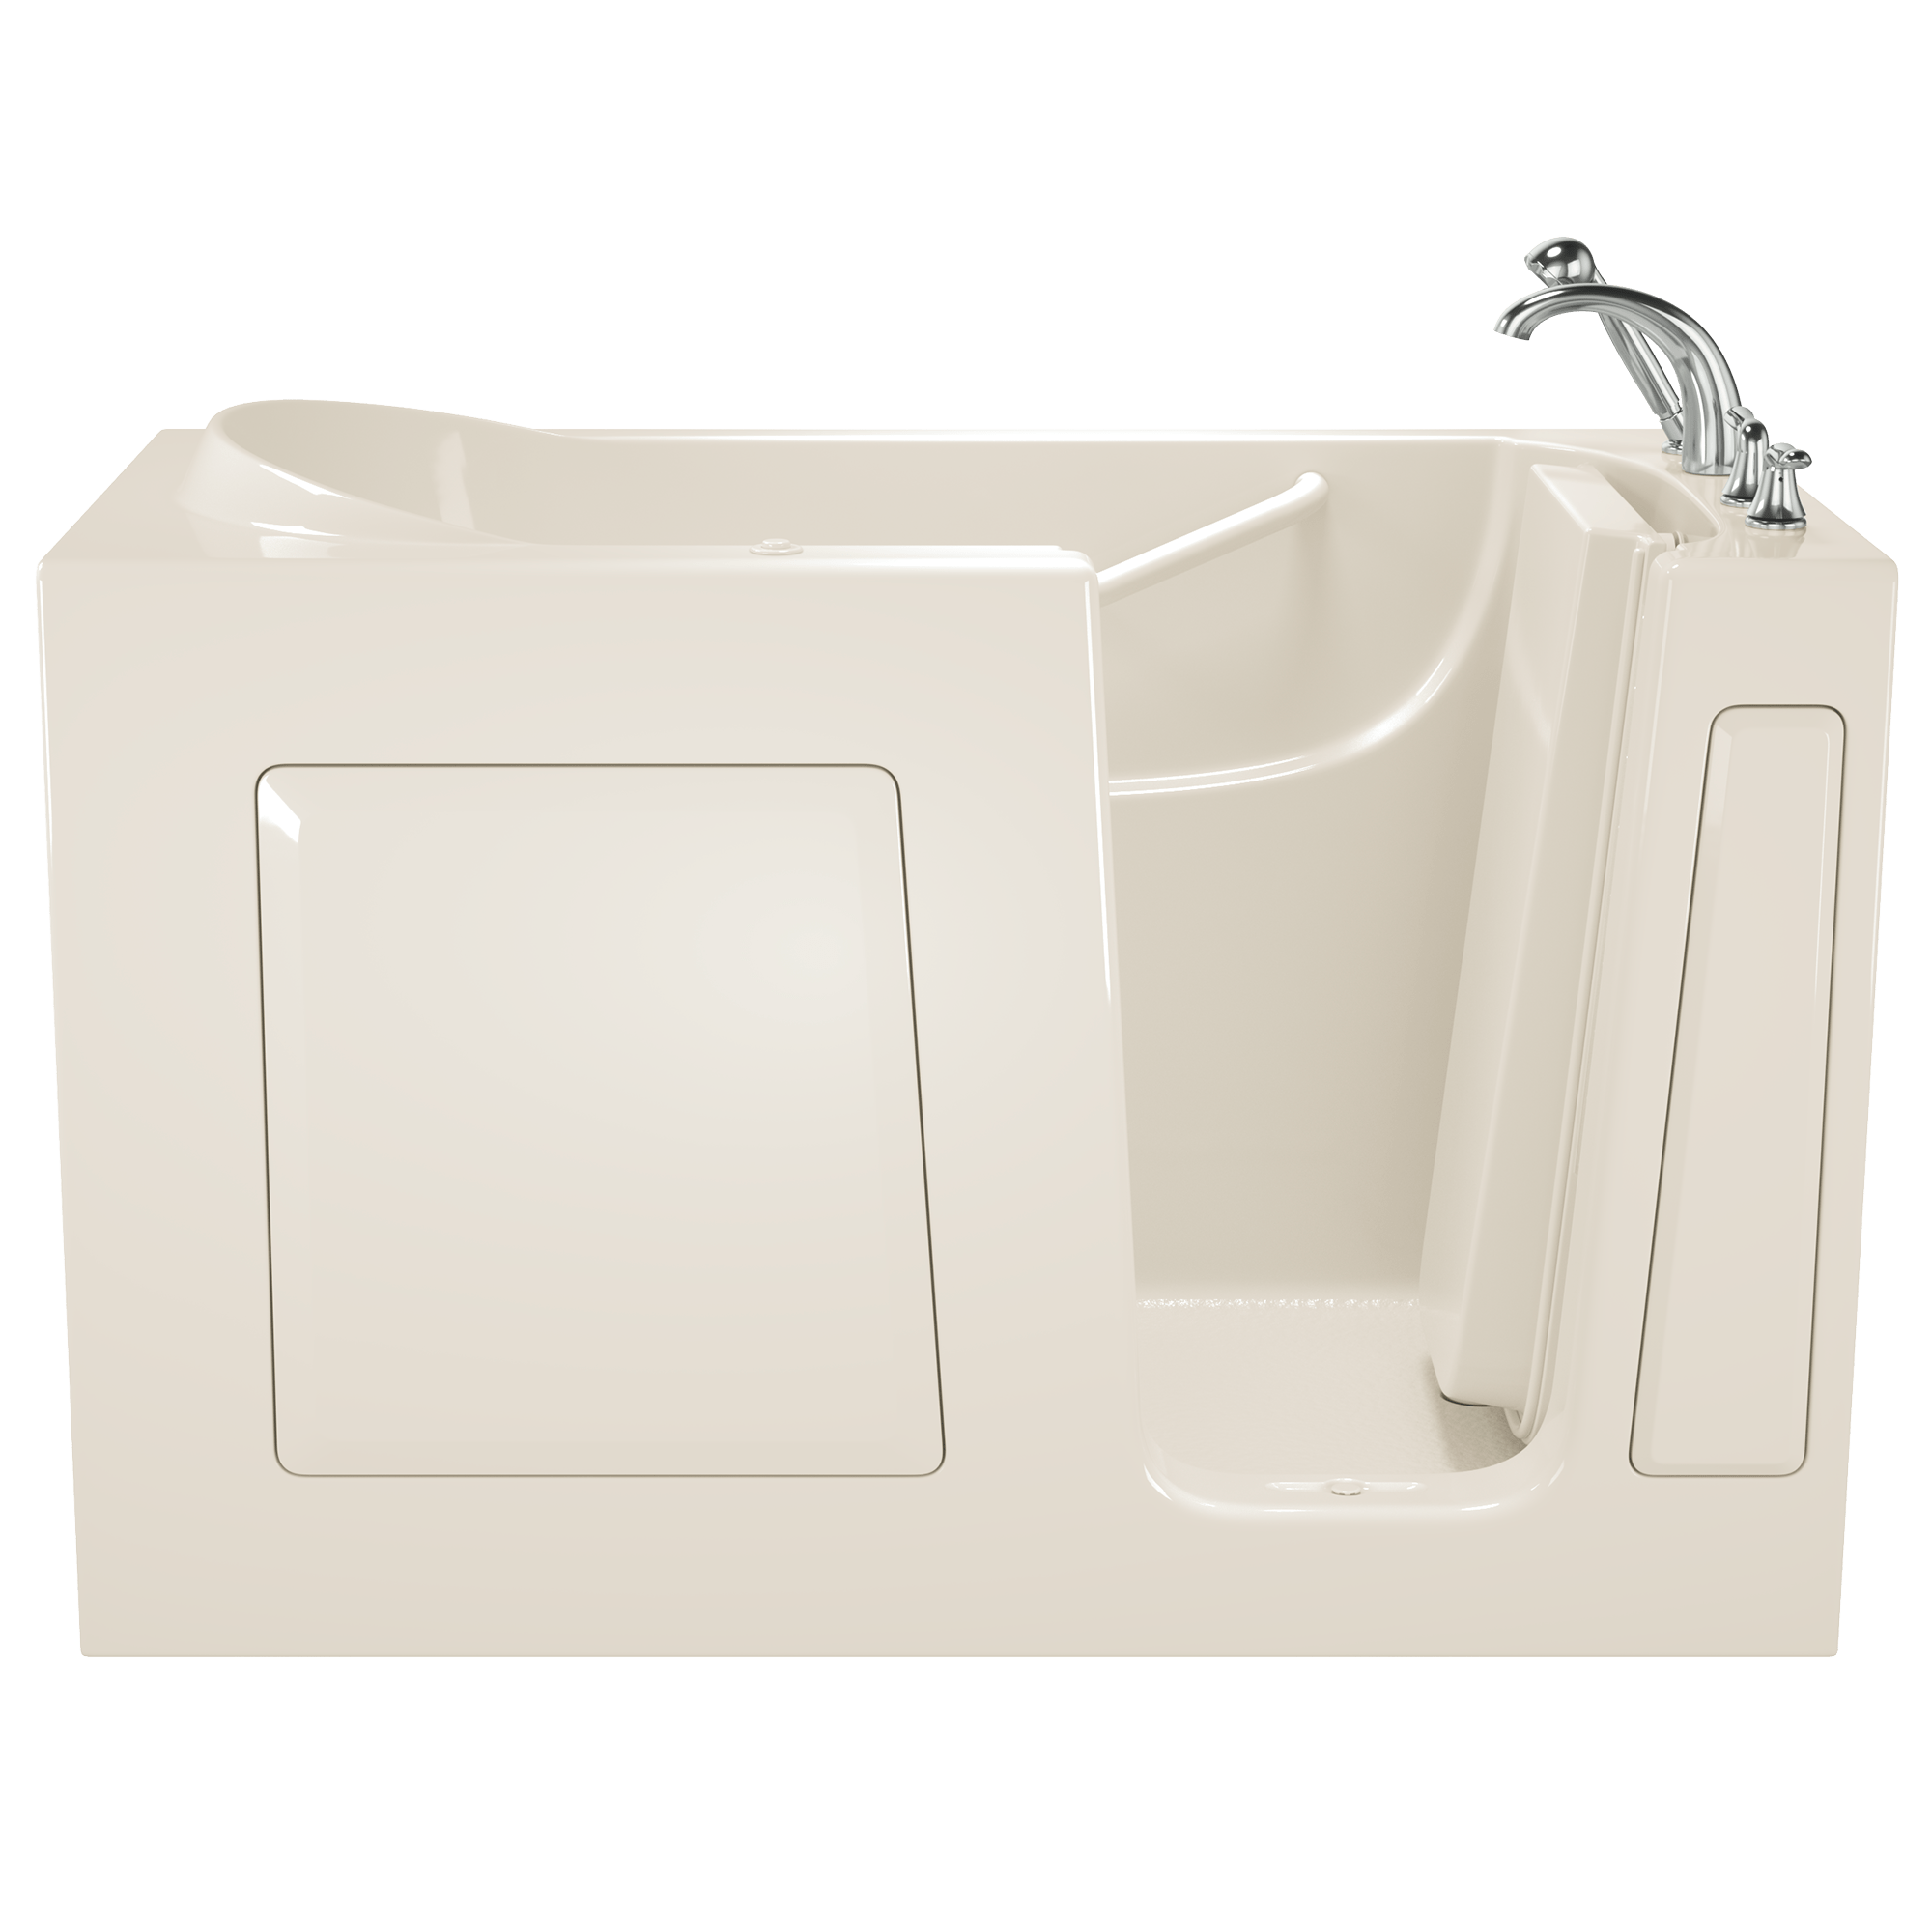 Gelcoat Entry Series 60 x 30-Inch Walk-In Tub With Whirlpool System – Right-Hand Drain With Faucet